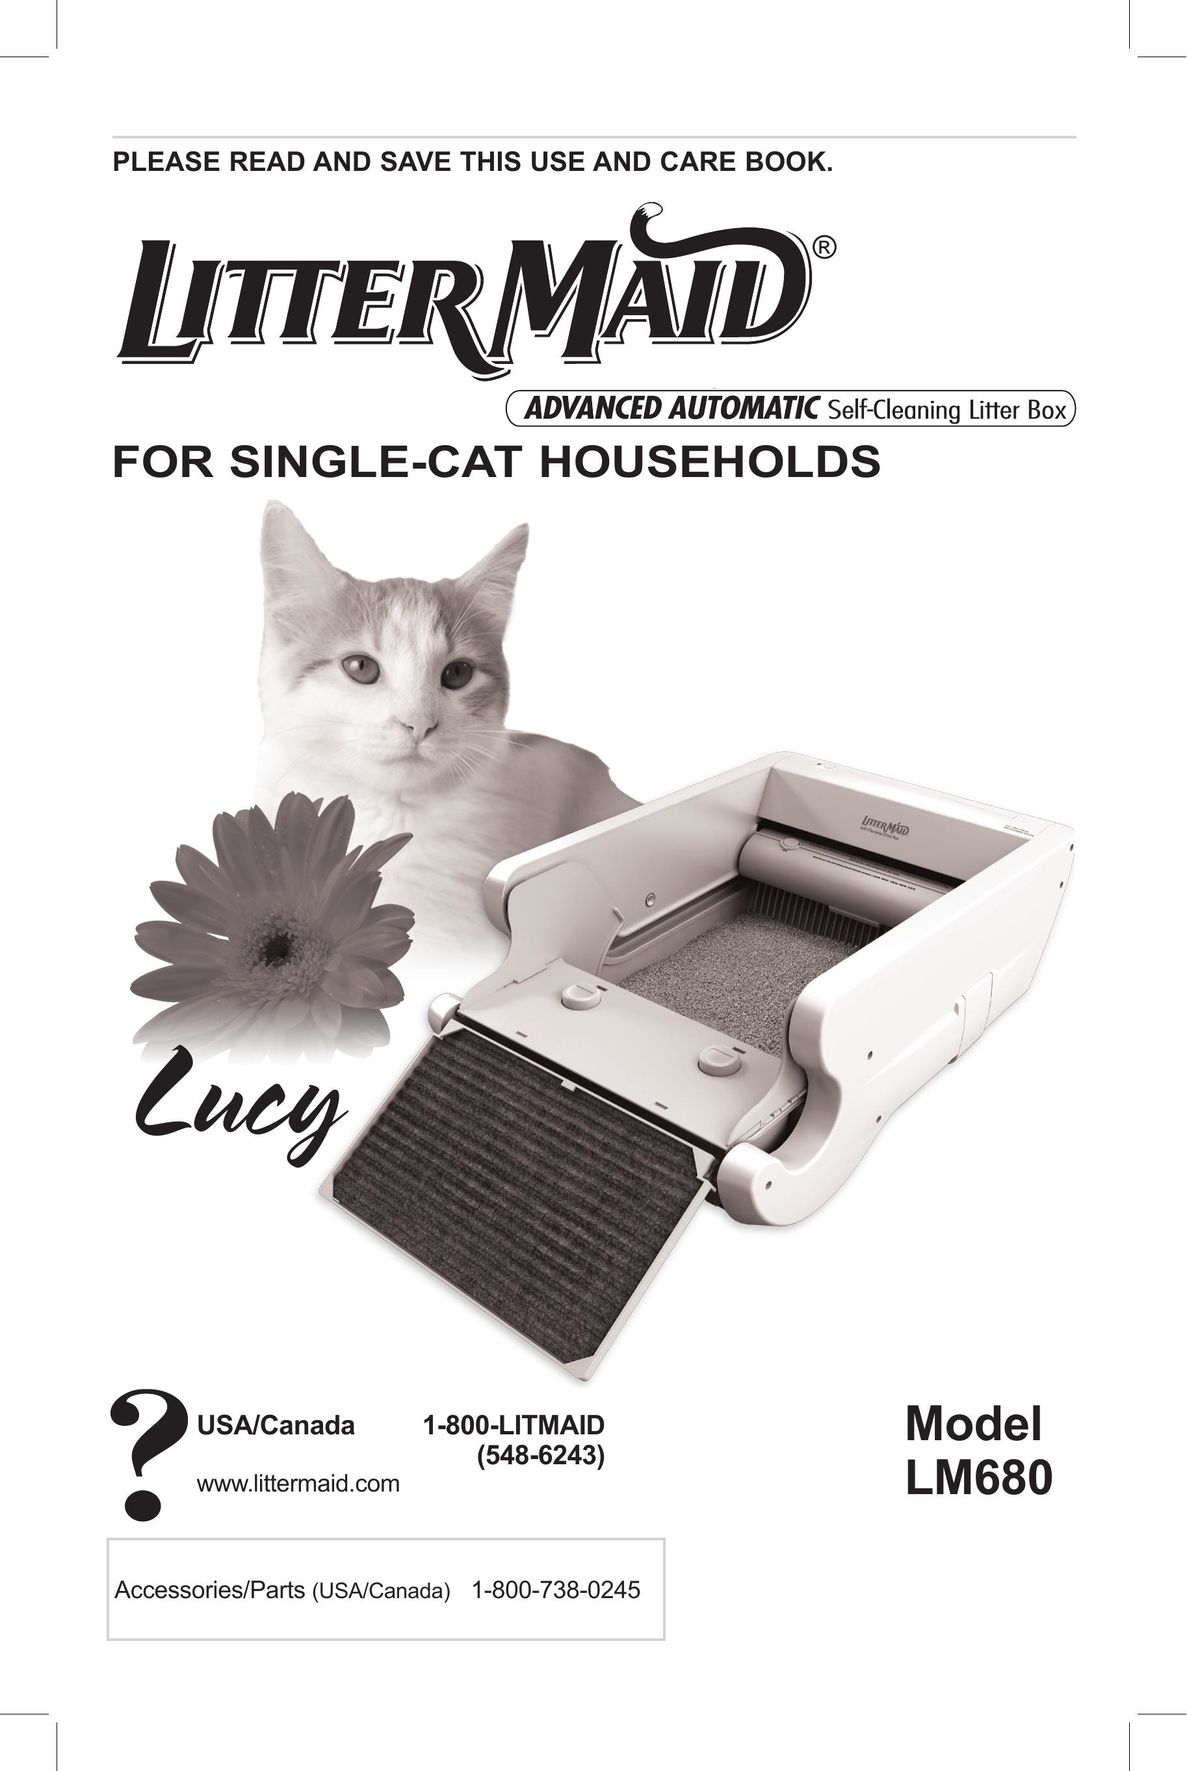 Applica LM680 Pet Care Product User Manual